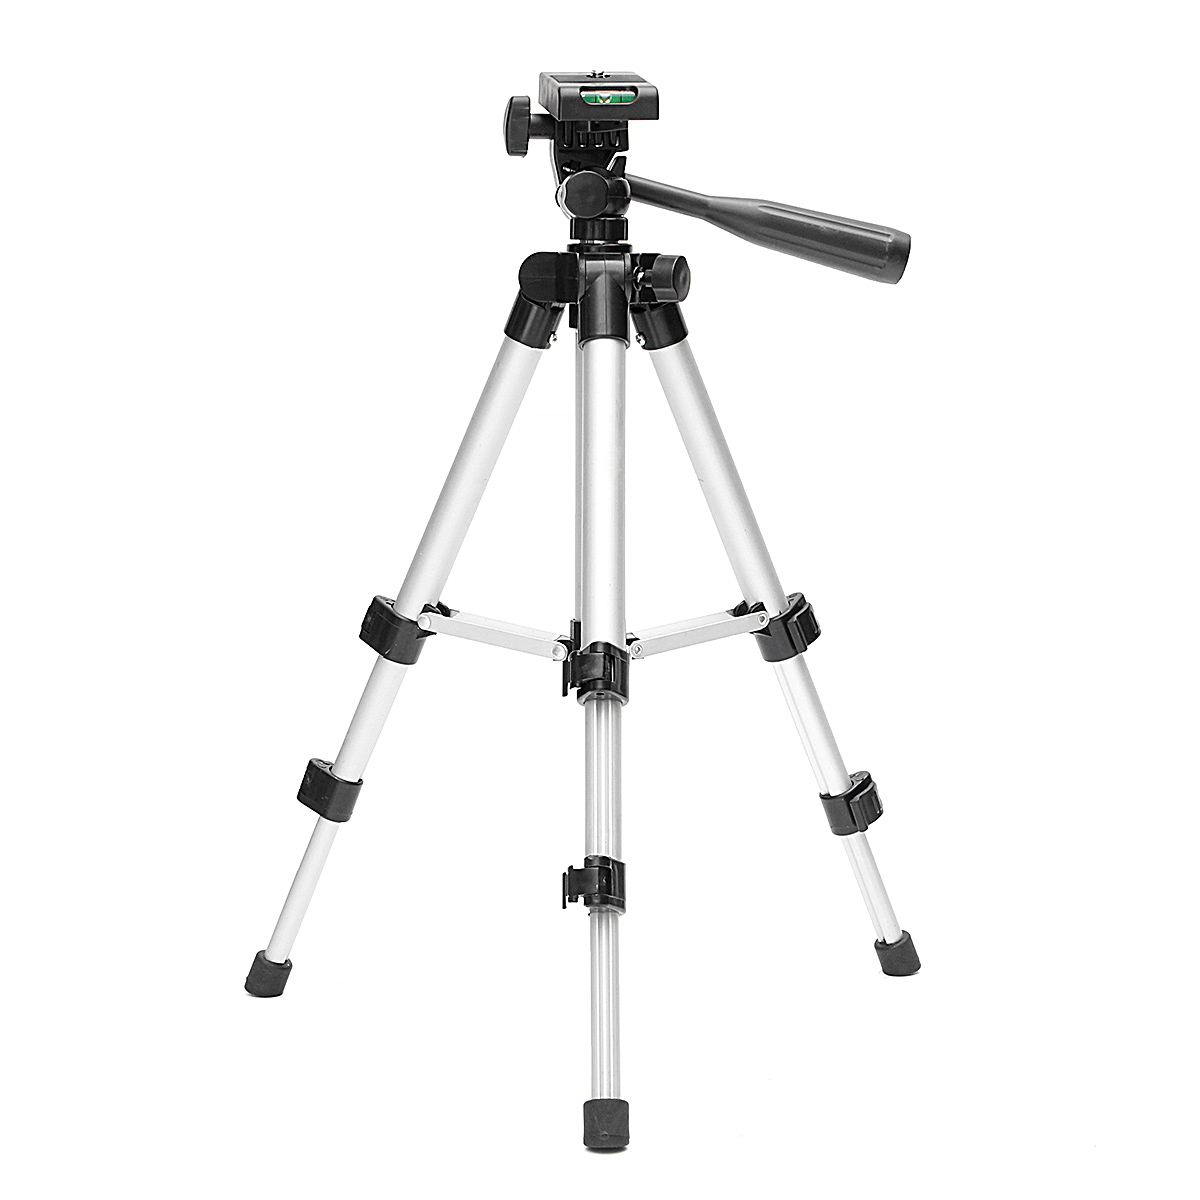 65cm Mini Portable Foldable Tripod Stand with Clip for Smartphpne Action Cam DV Camcorder